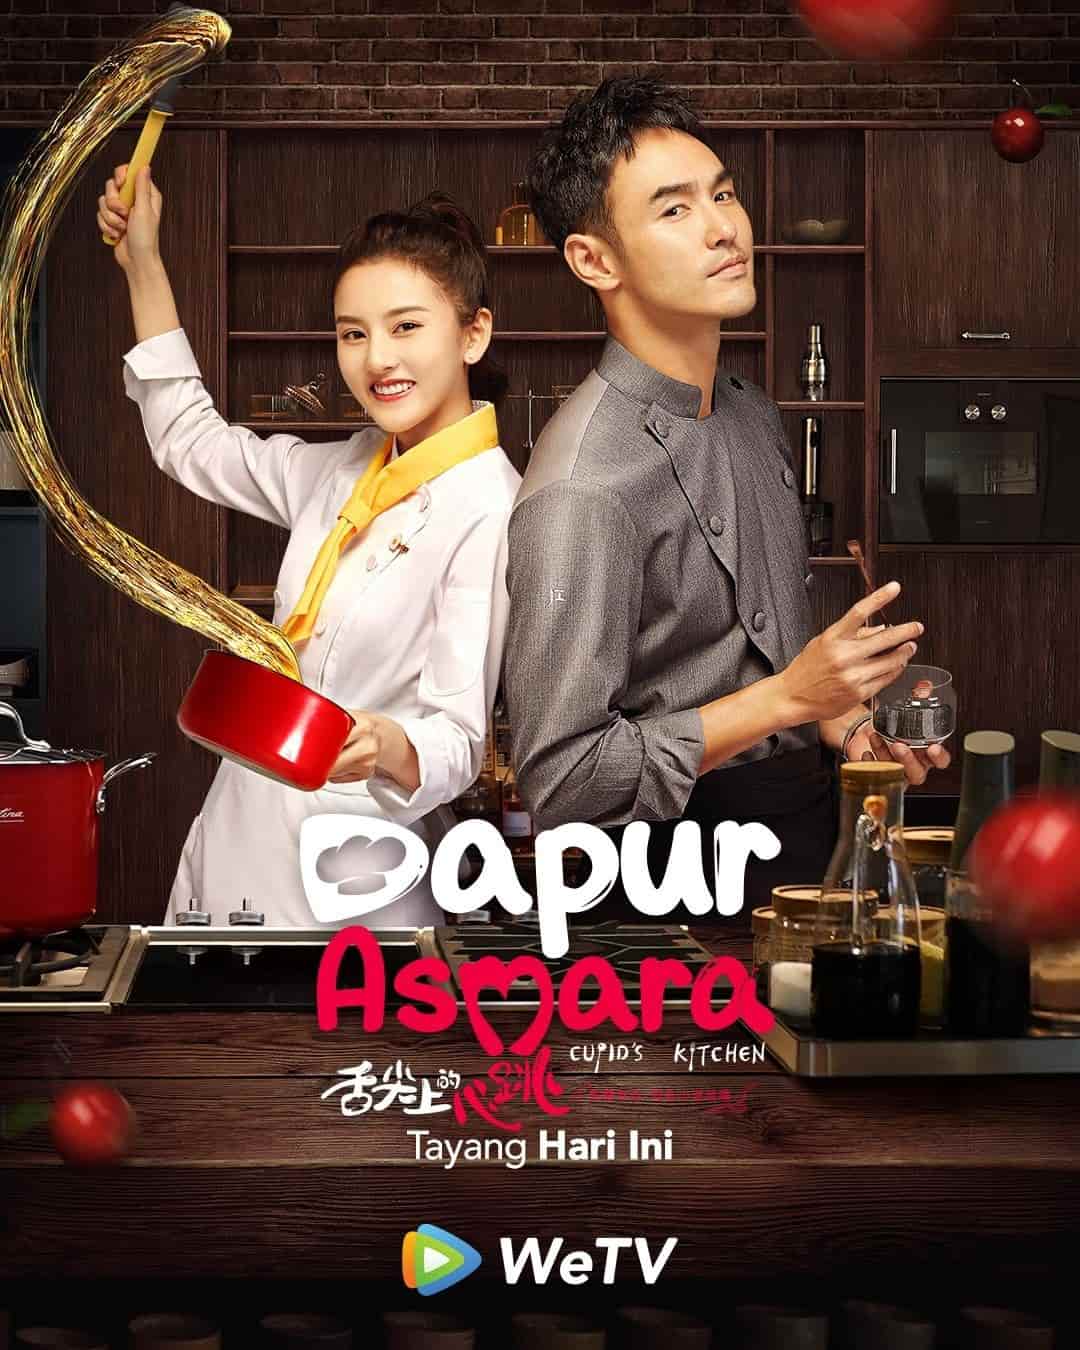 Cupid's Kitchen - Sinopsis, Pemain, OST, Episode, Review